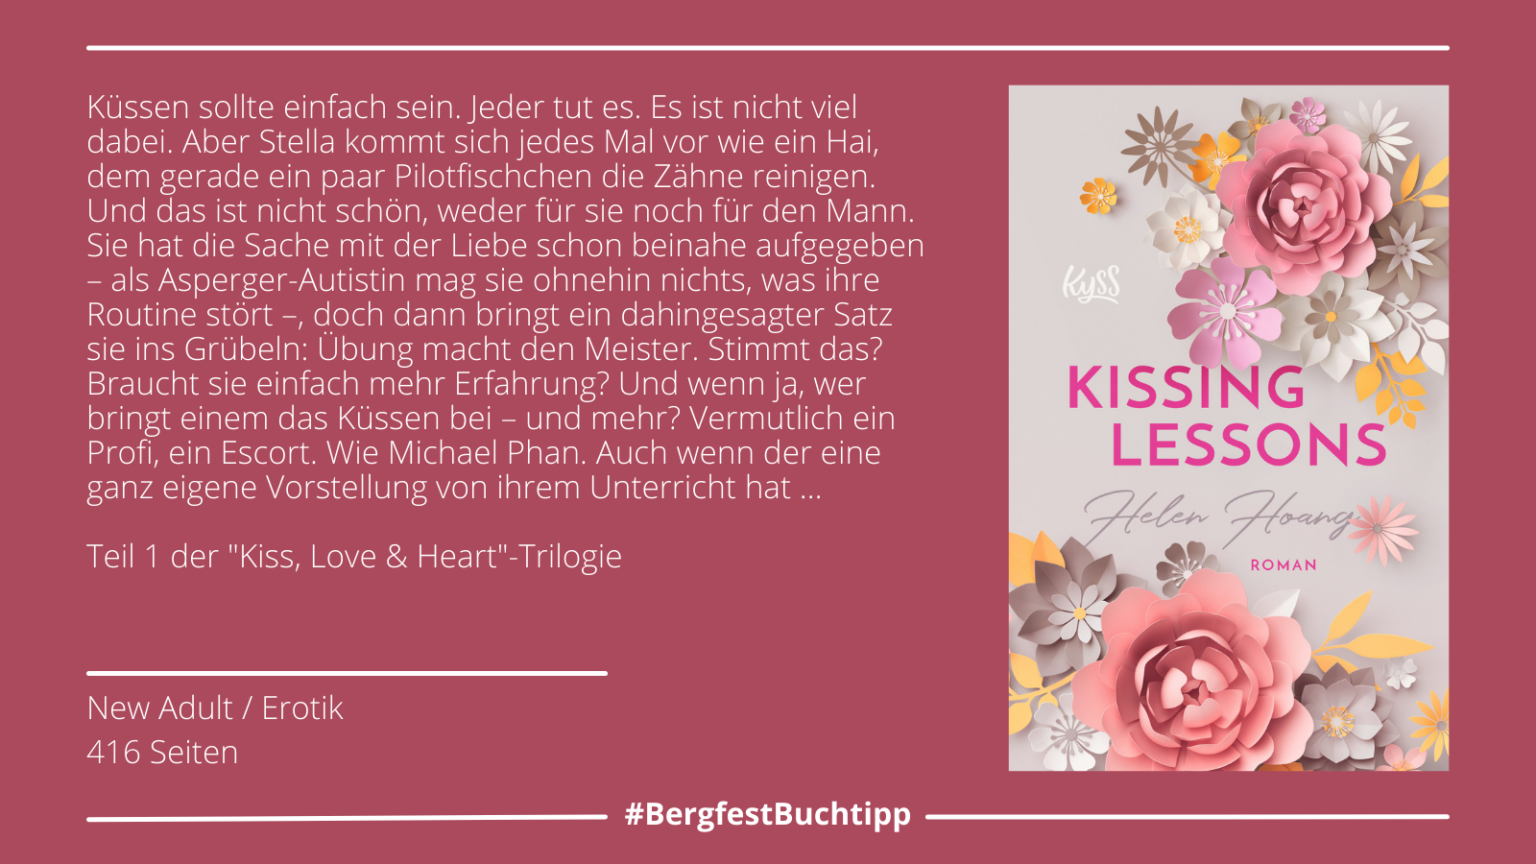 Woche 5: "Kissing Lessons" von Helen Hoang